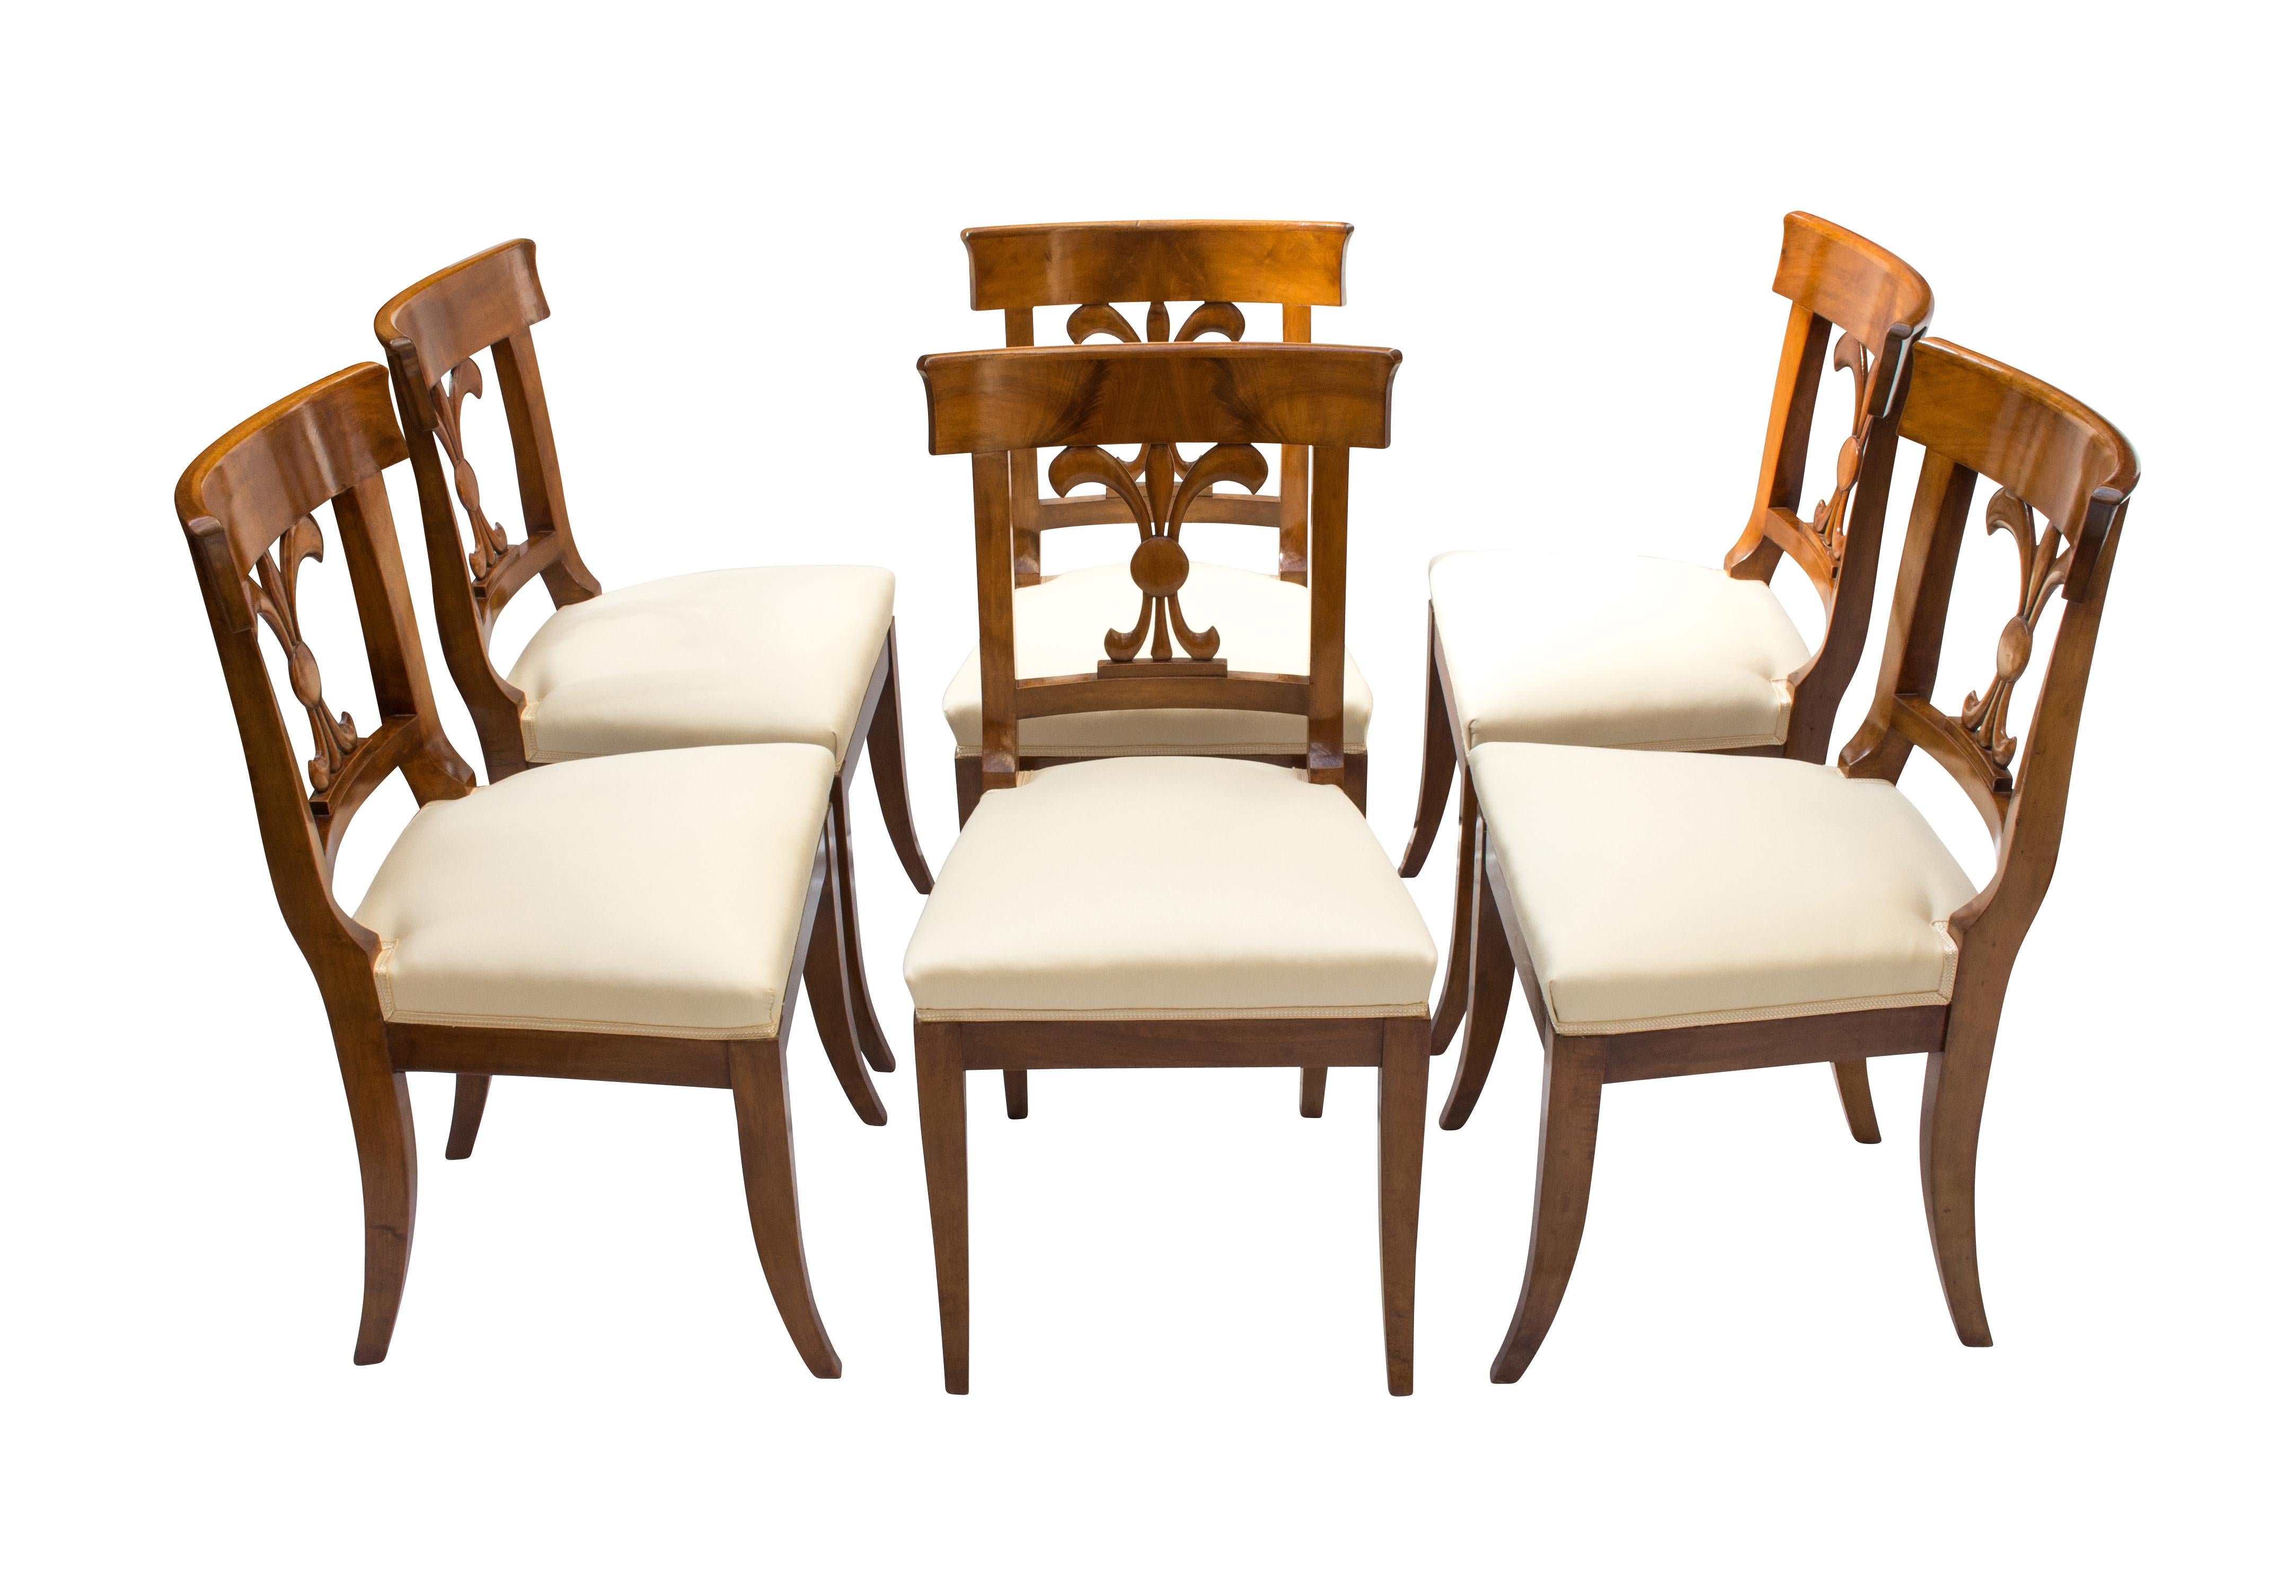 Set of six chairs, Biedermeier, solid walnut-wood. The chairs are new upholstered in the traditional style with straps and feathers. In very good restored condition. 
Measure: Seat height 47cm.